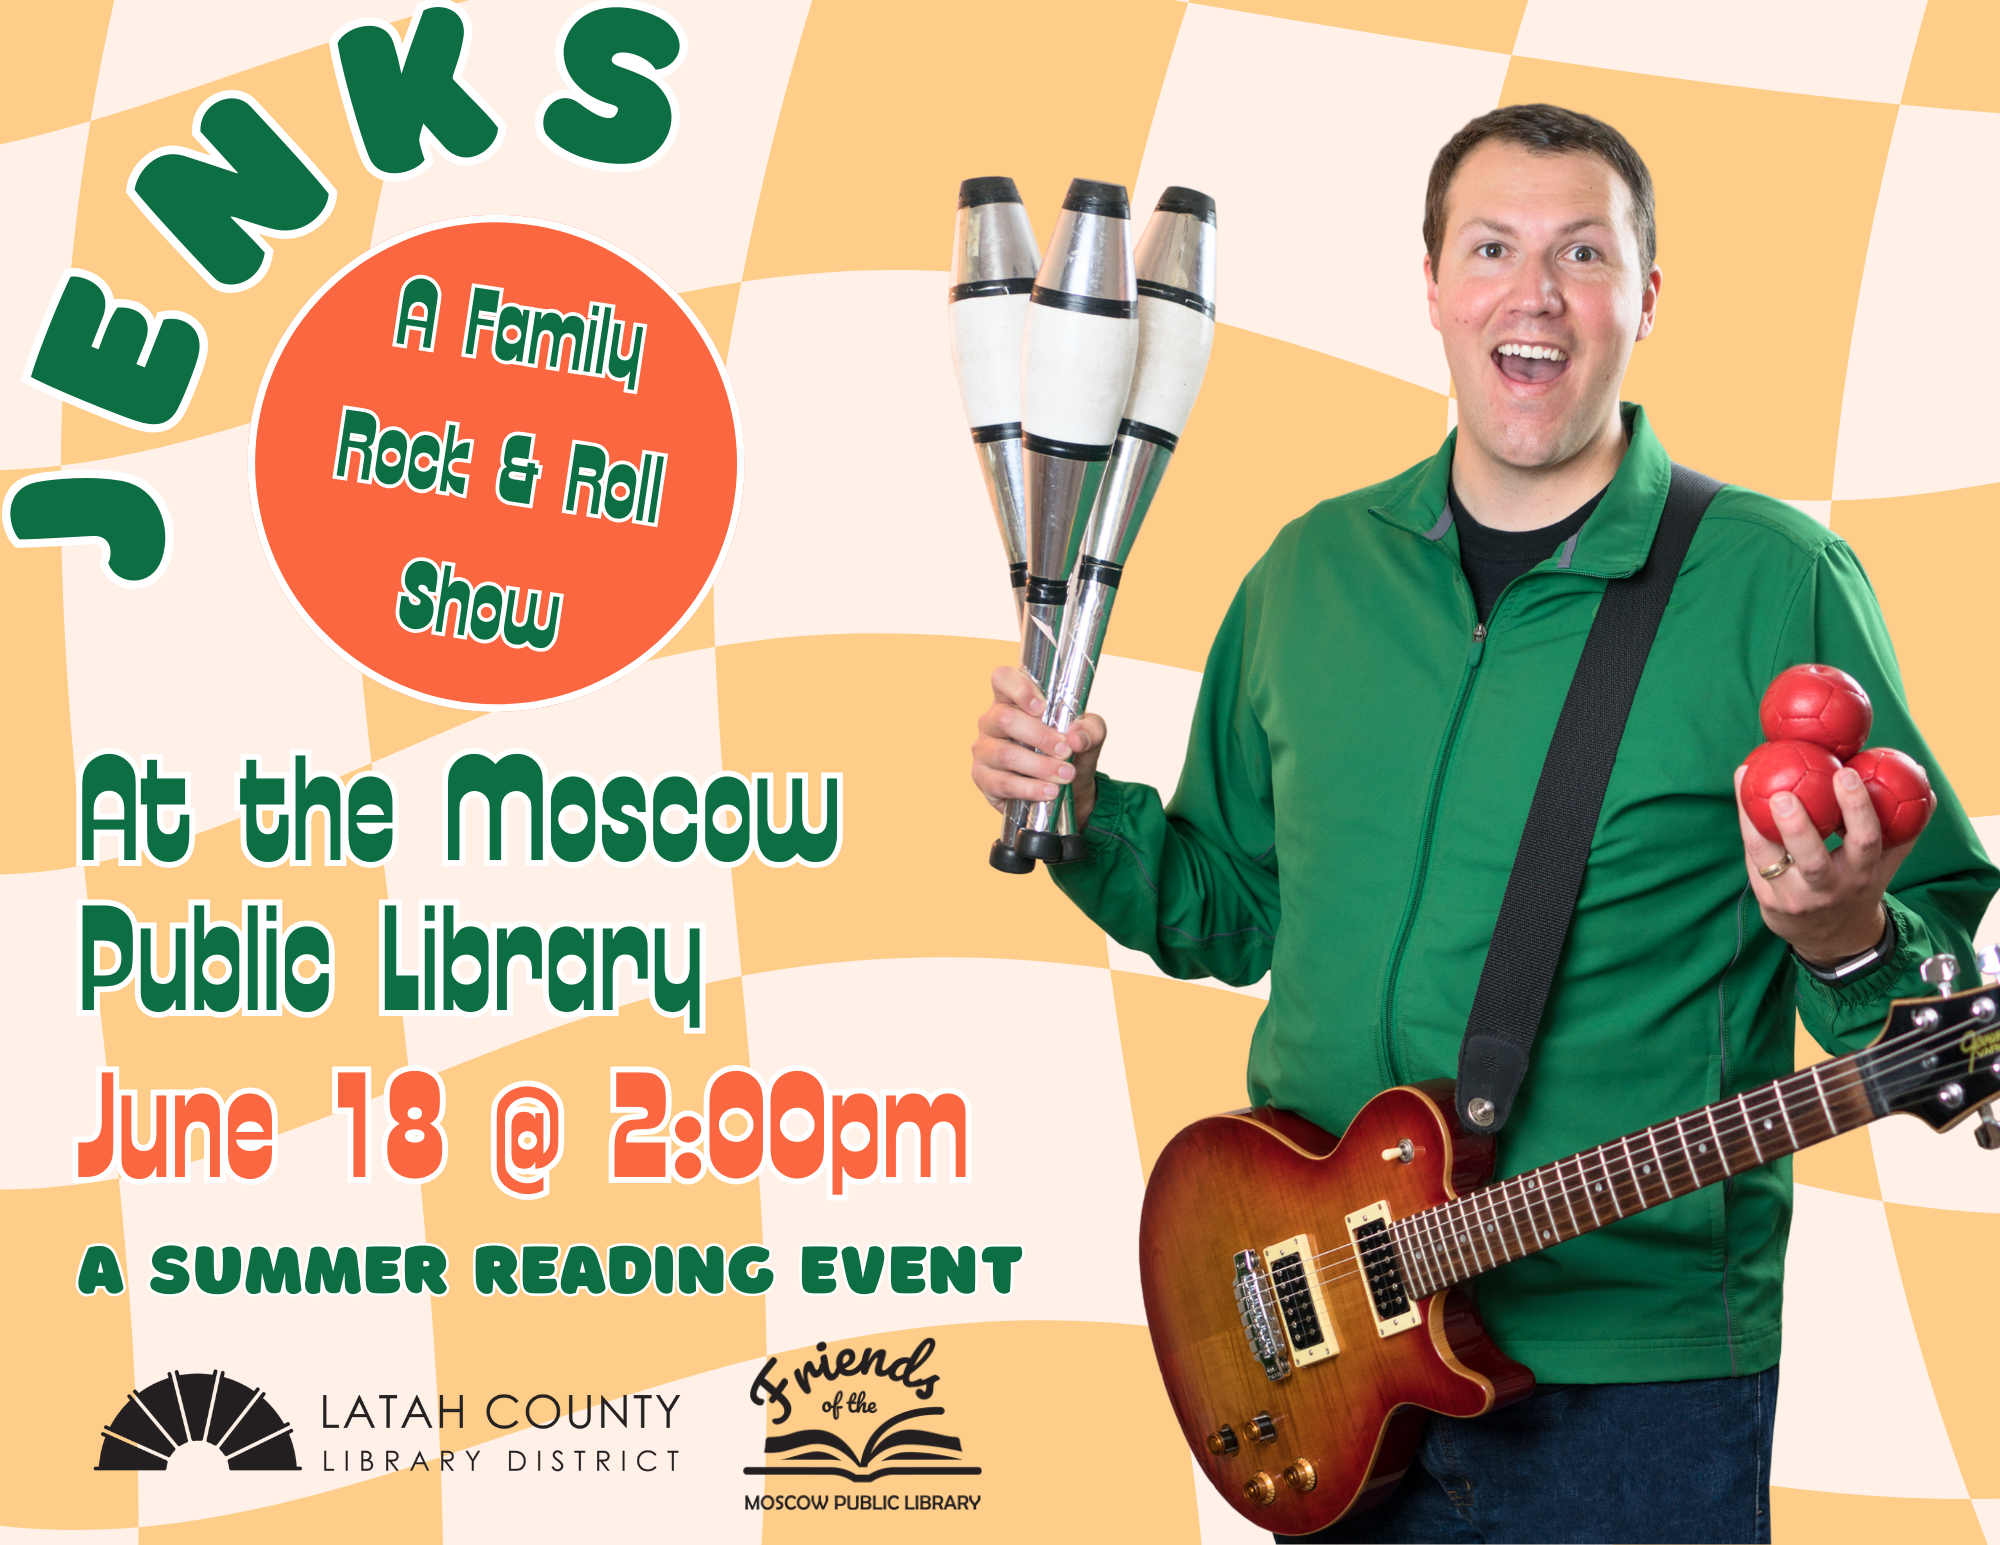 Jenks: Family Rock and Roll! at the Moscow Public Library